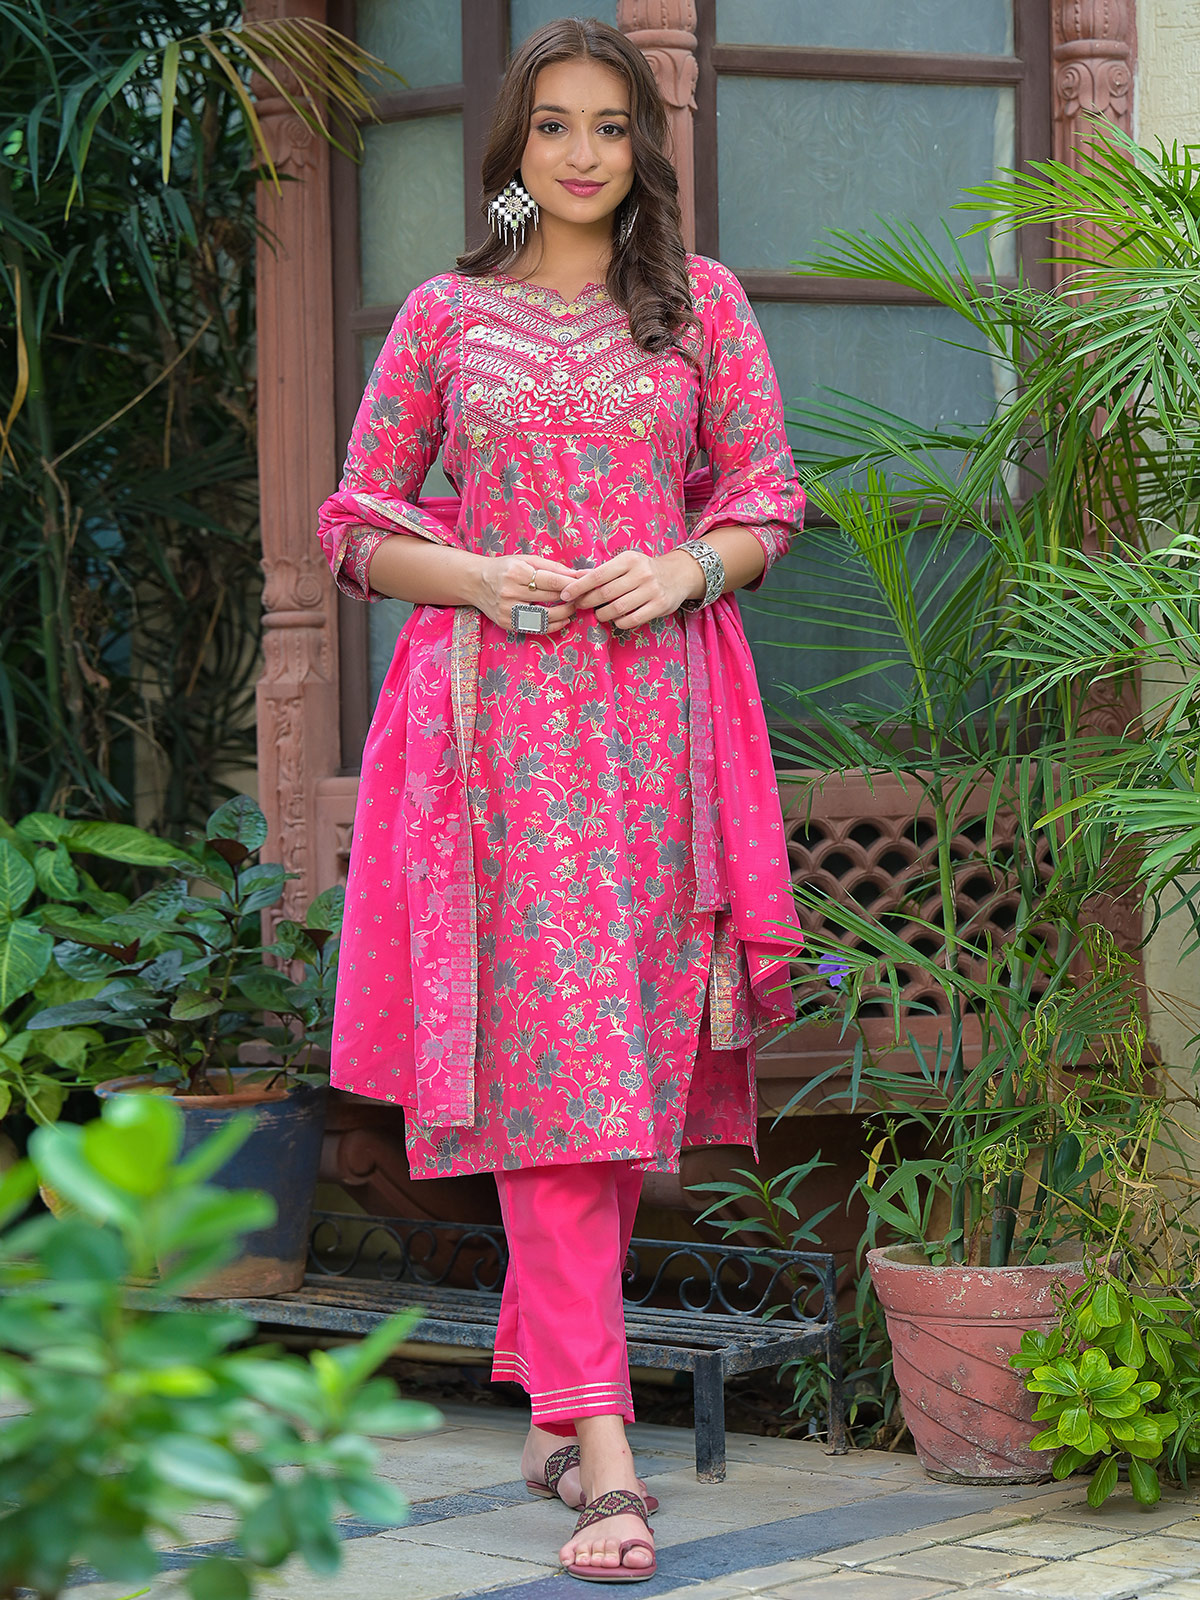 Where can we find good kurtis in Bangalore? - Quora